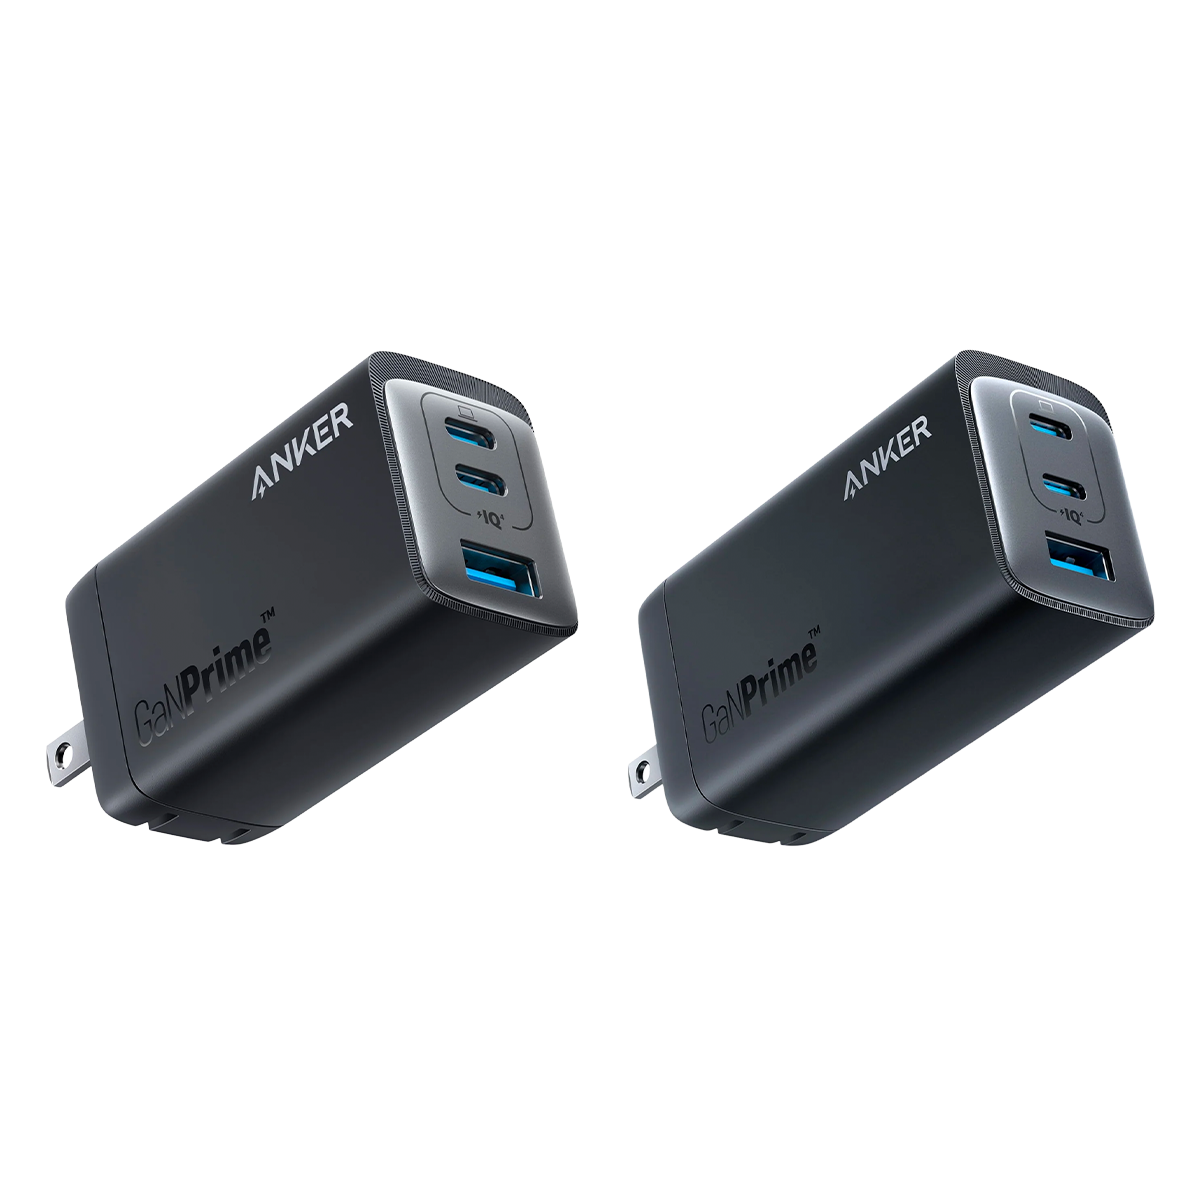 Anker's New 100W GaN Charger Features Three USB Ports, 34% Smaller Size  Than Apple's 96W Charger - MacRumors